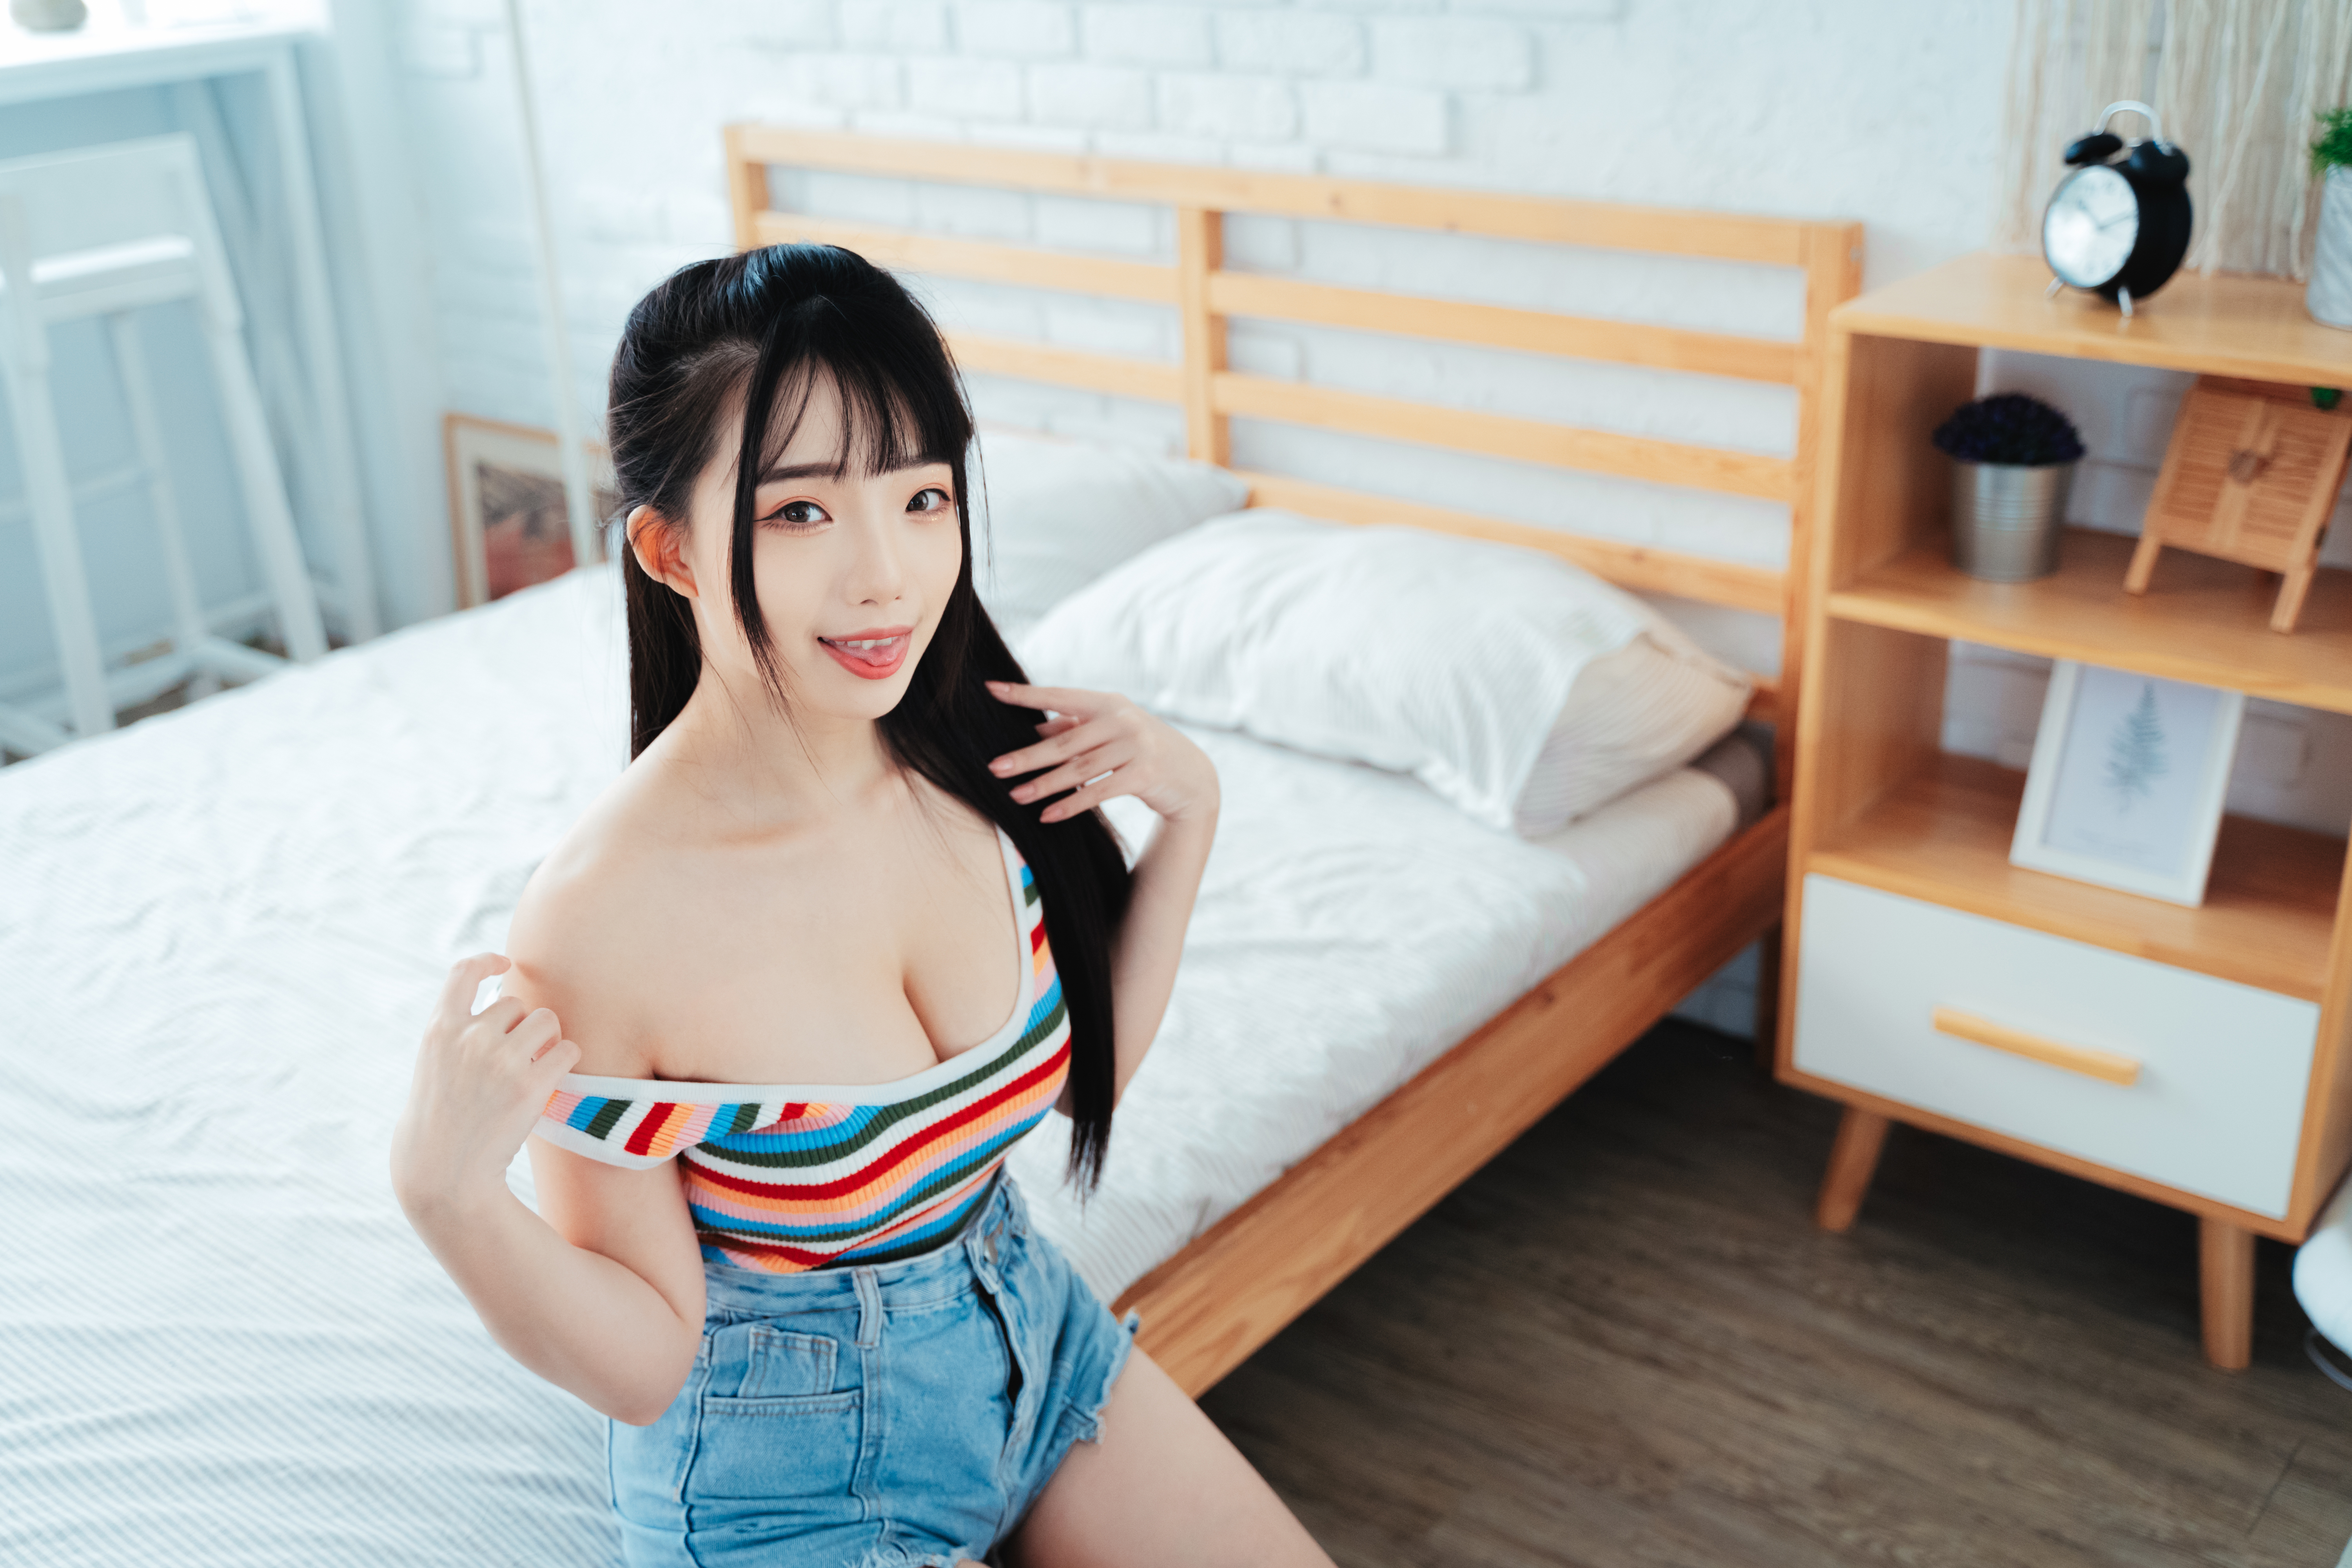 People 6000x4000 Ning Shioulin women model cleavage striped tops jean shorts Asian indoors